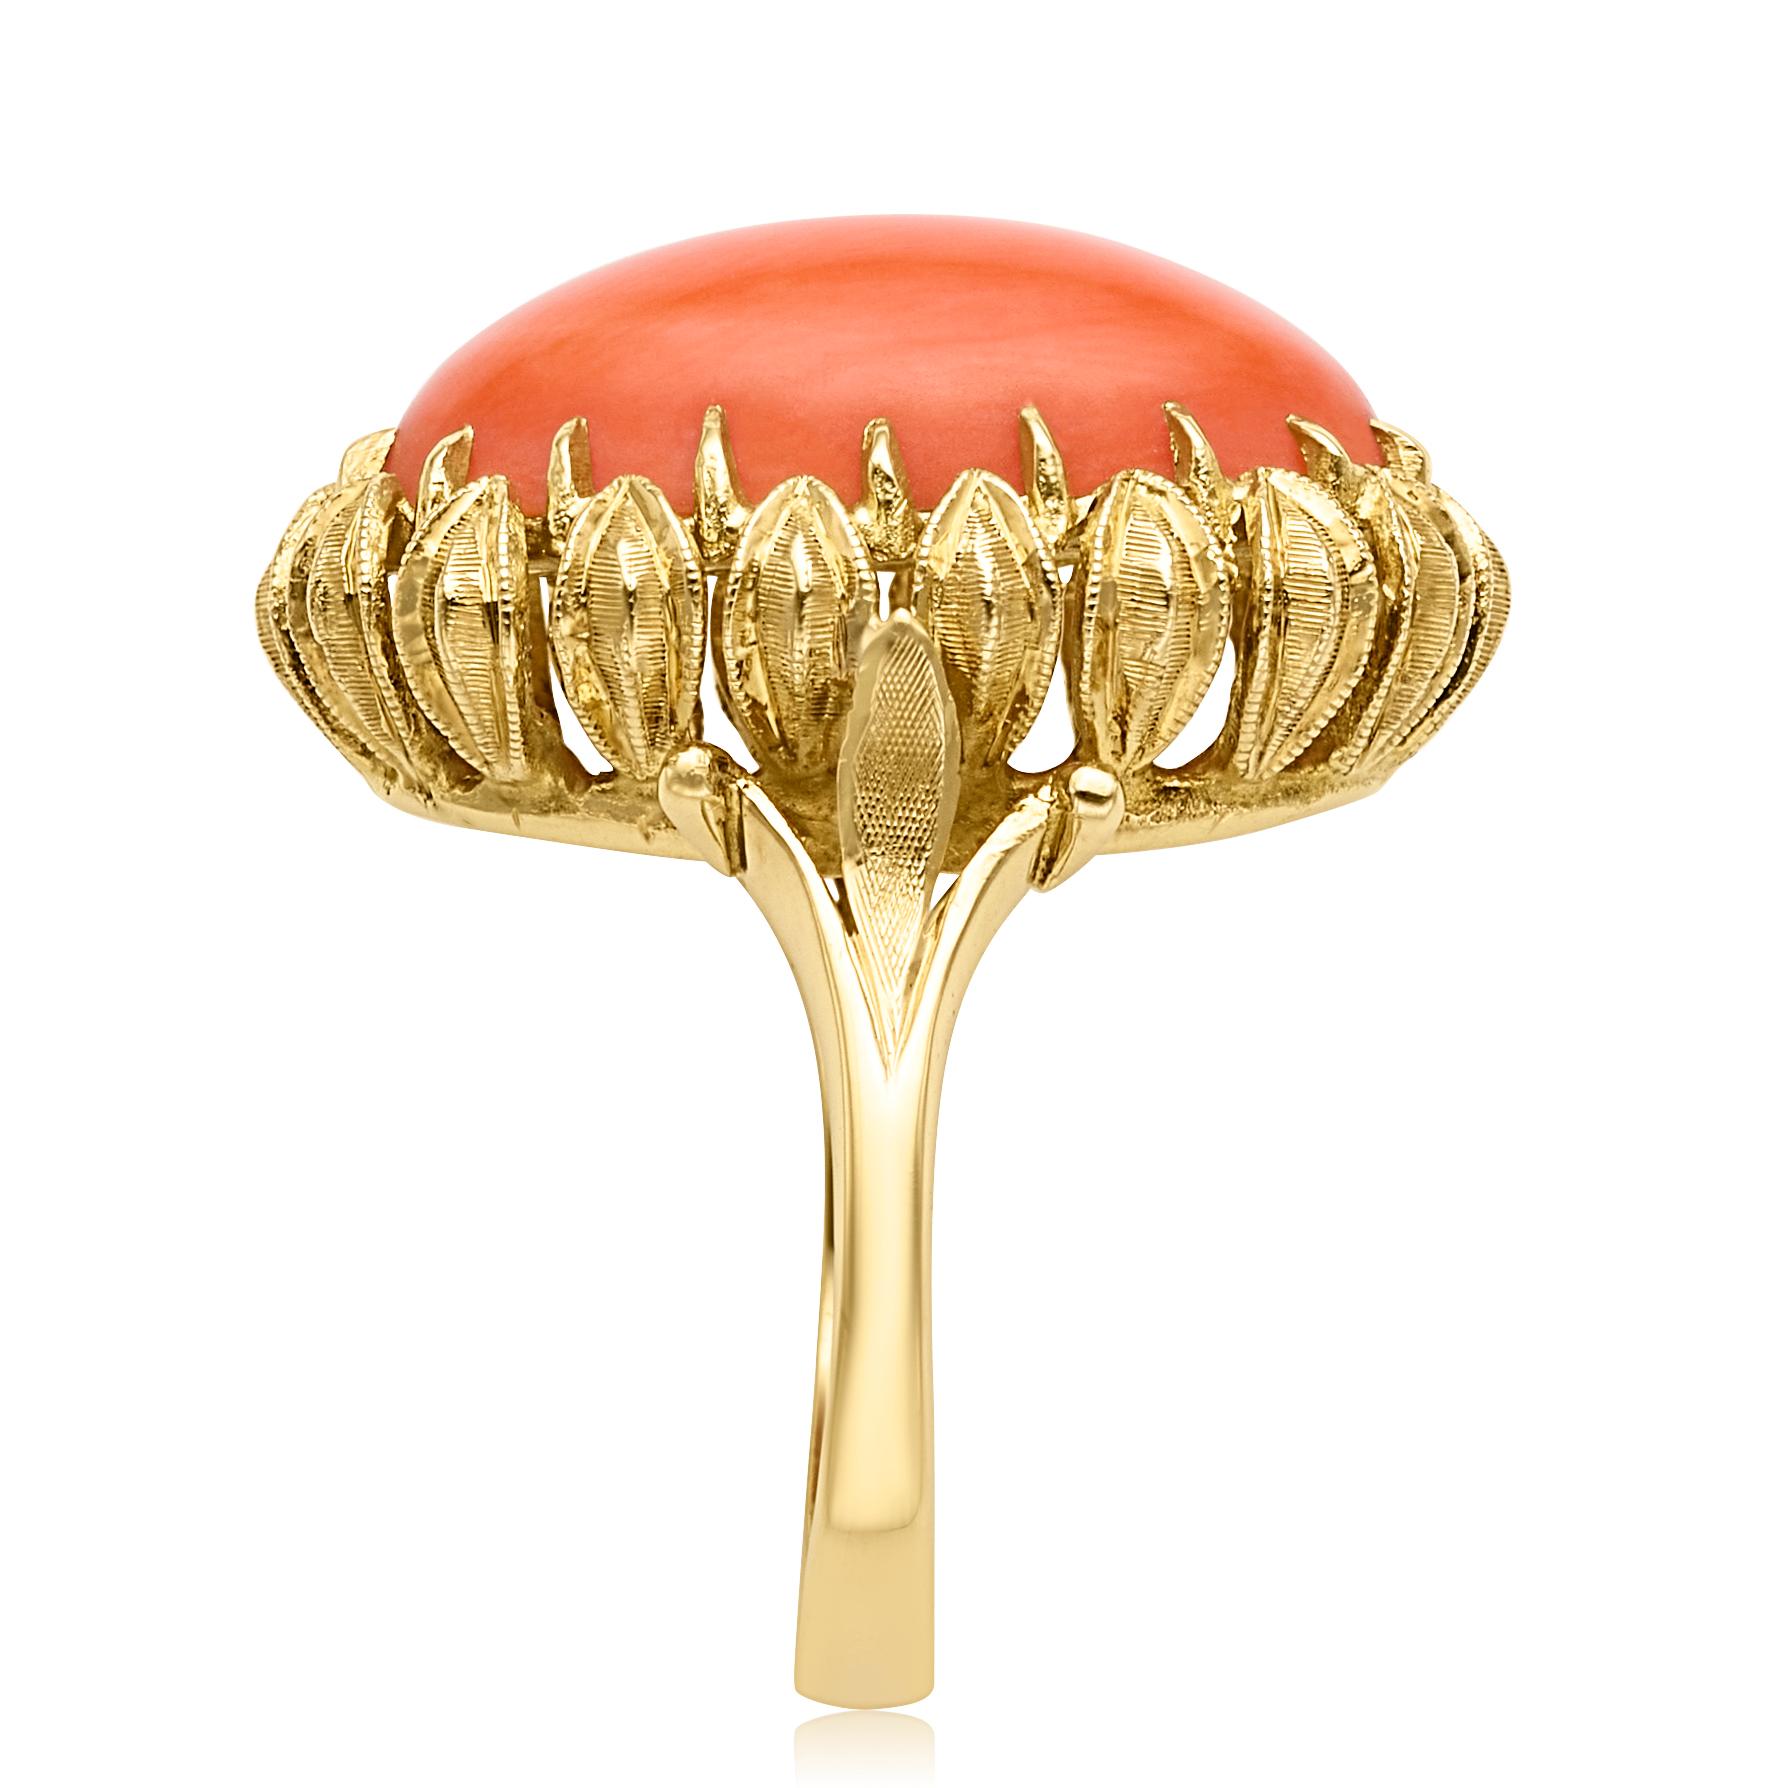 From the Eiseman Estate Jewelry Collection, circa 1970s, 18 karat yellow gold coral cocktail ring. This ring is crafted with a center oval cabochon cut coral stone measuring 20.12x12.21x5.97mm in diameter. The coral stone is in an ornate setting and